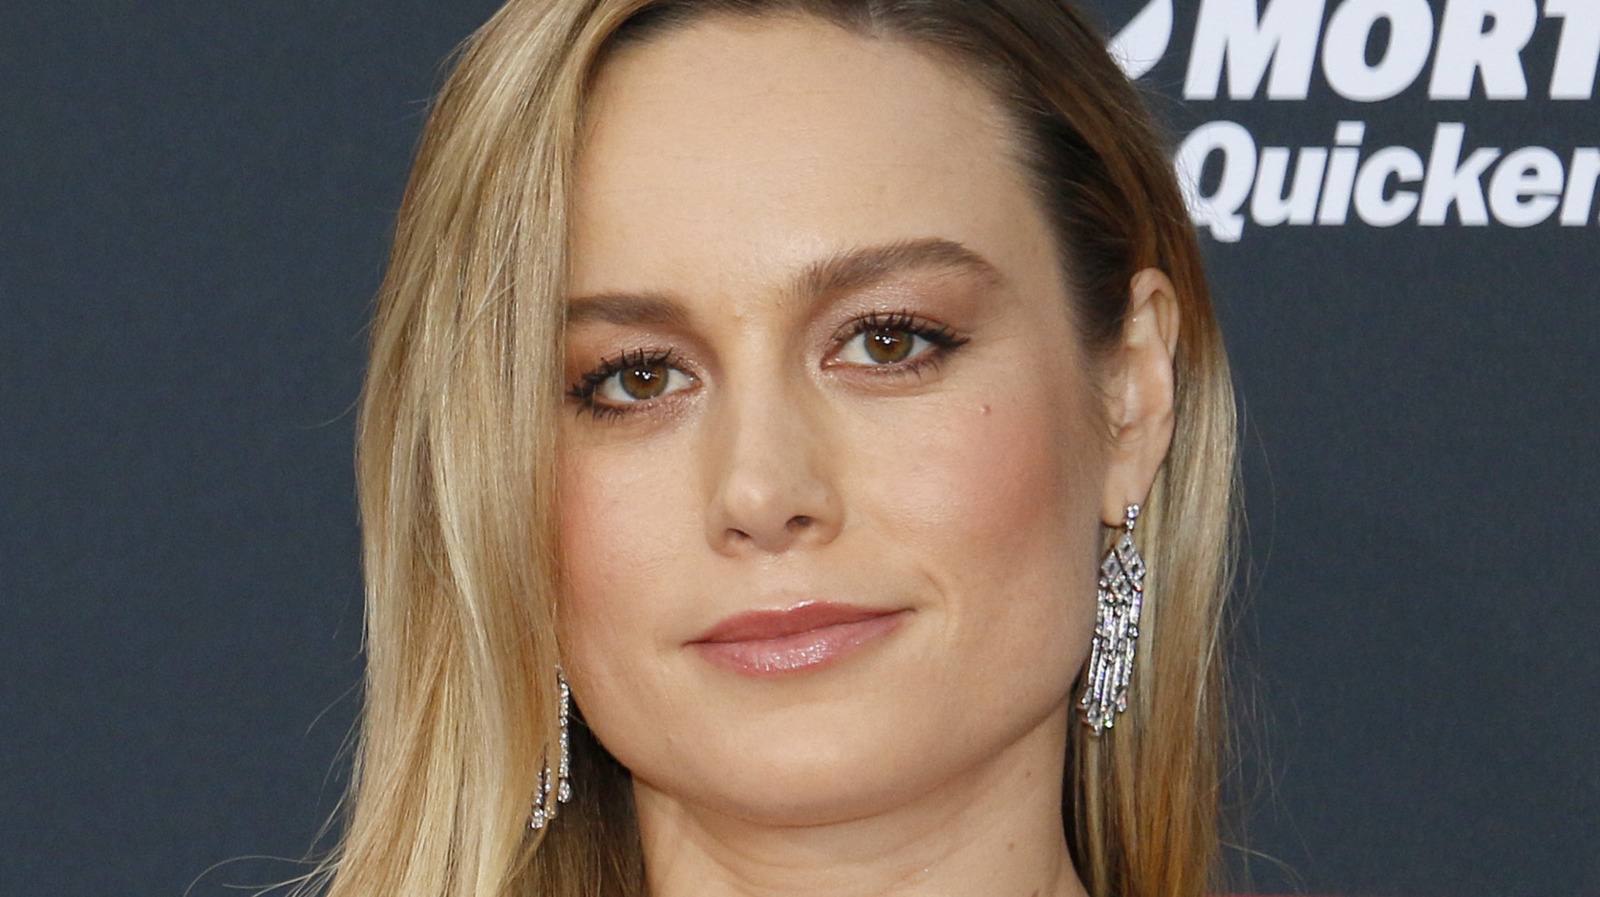 The Talent Brie Larson Uncovered While Prepping For Captain Marvel